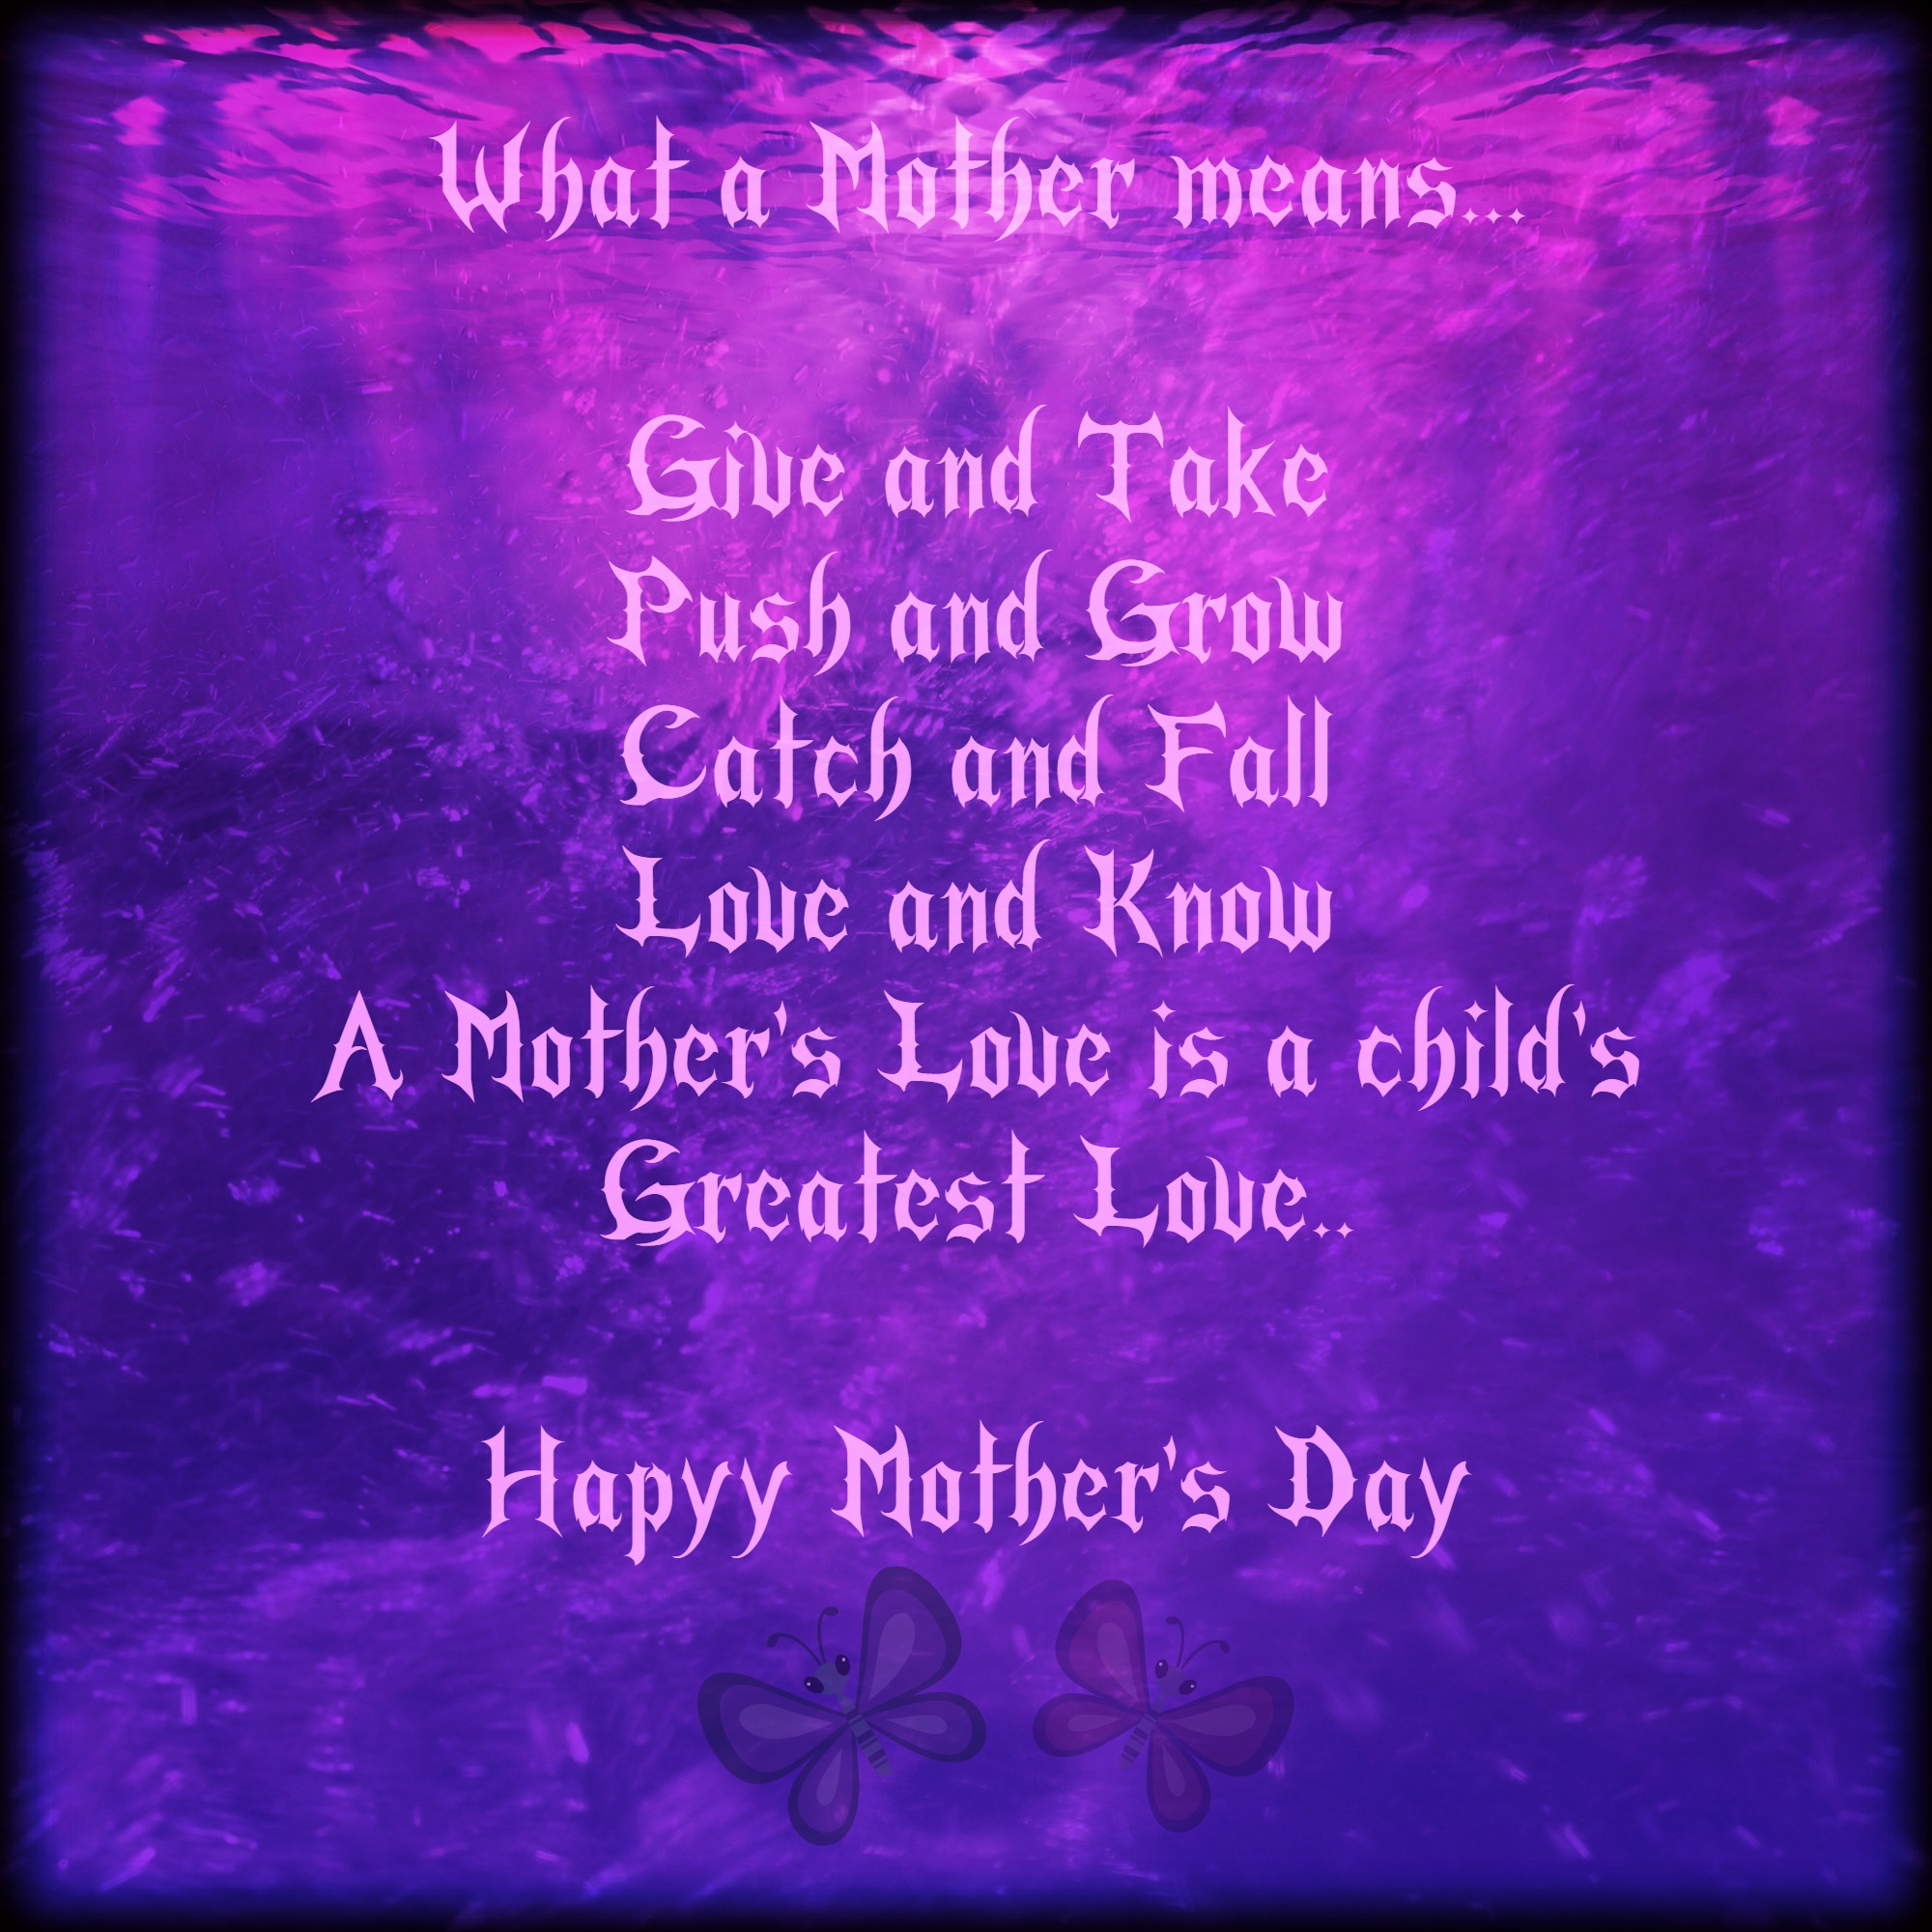 A Mother's Day Wish by GothKitten